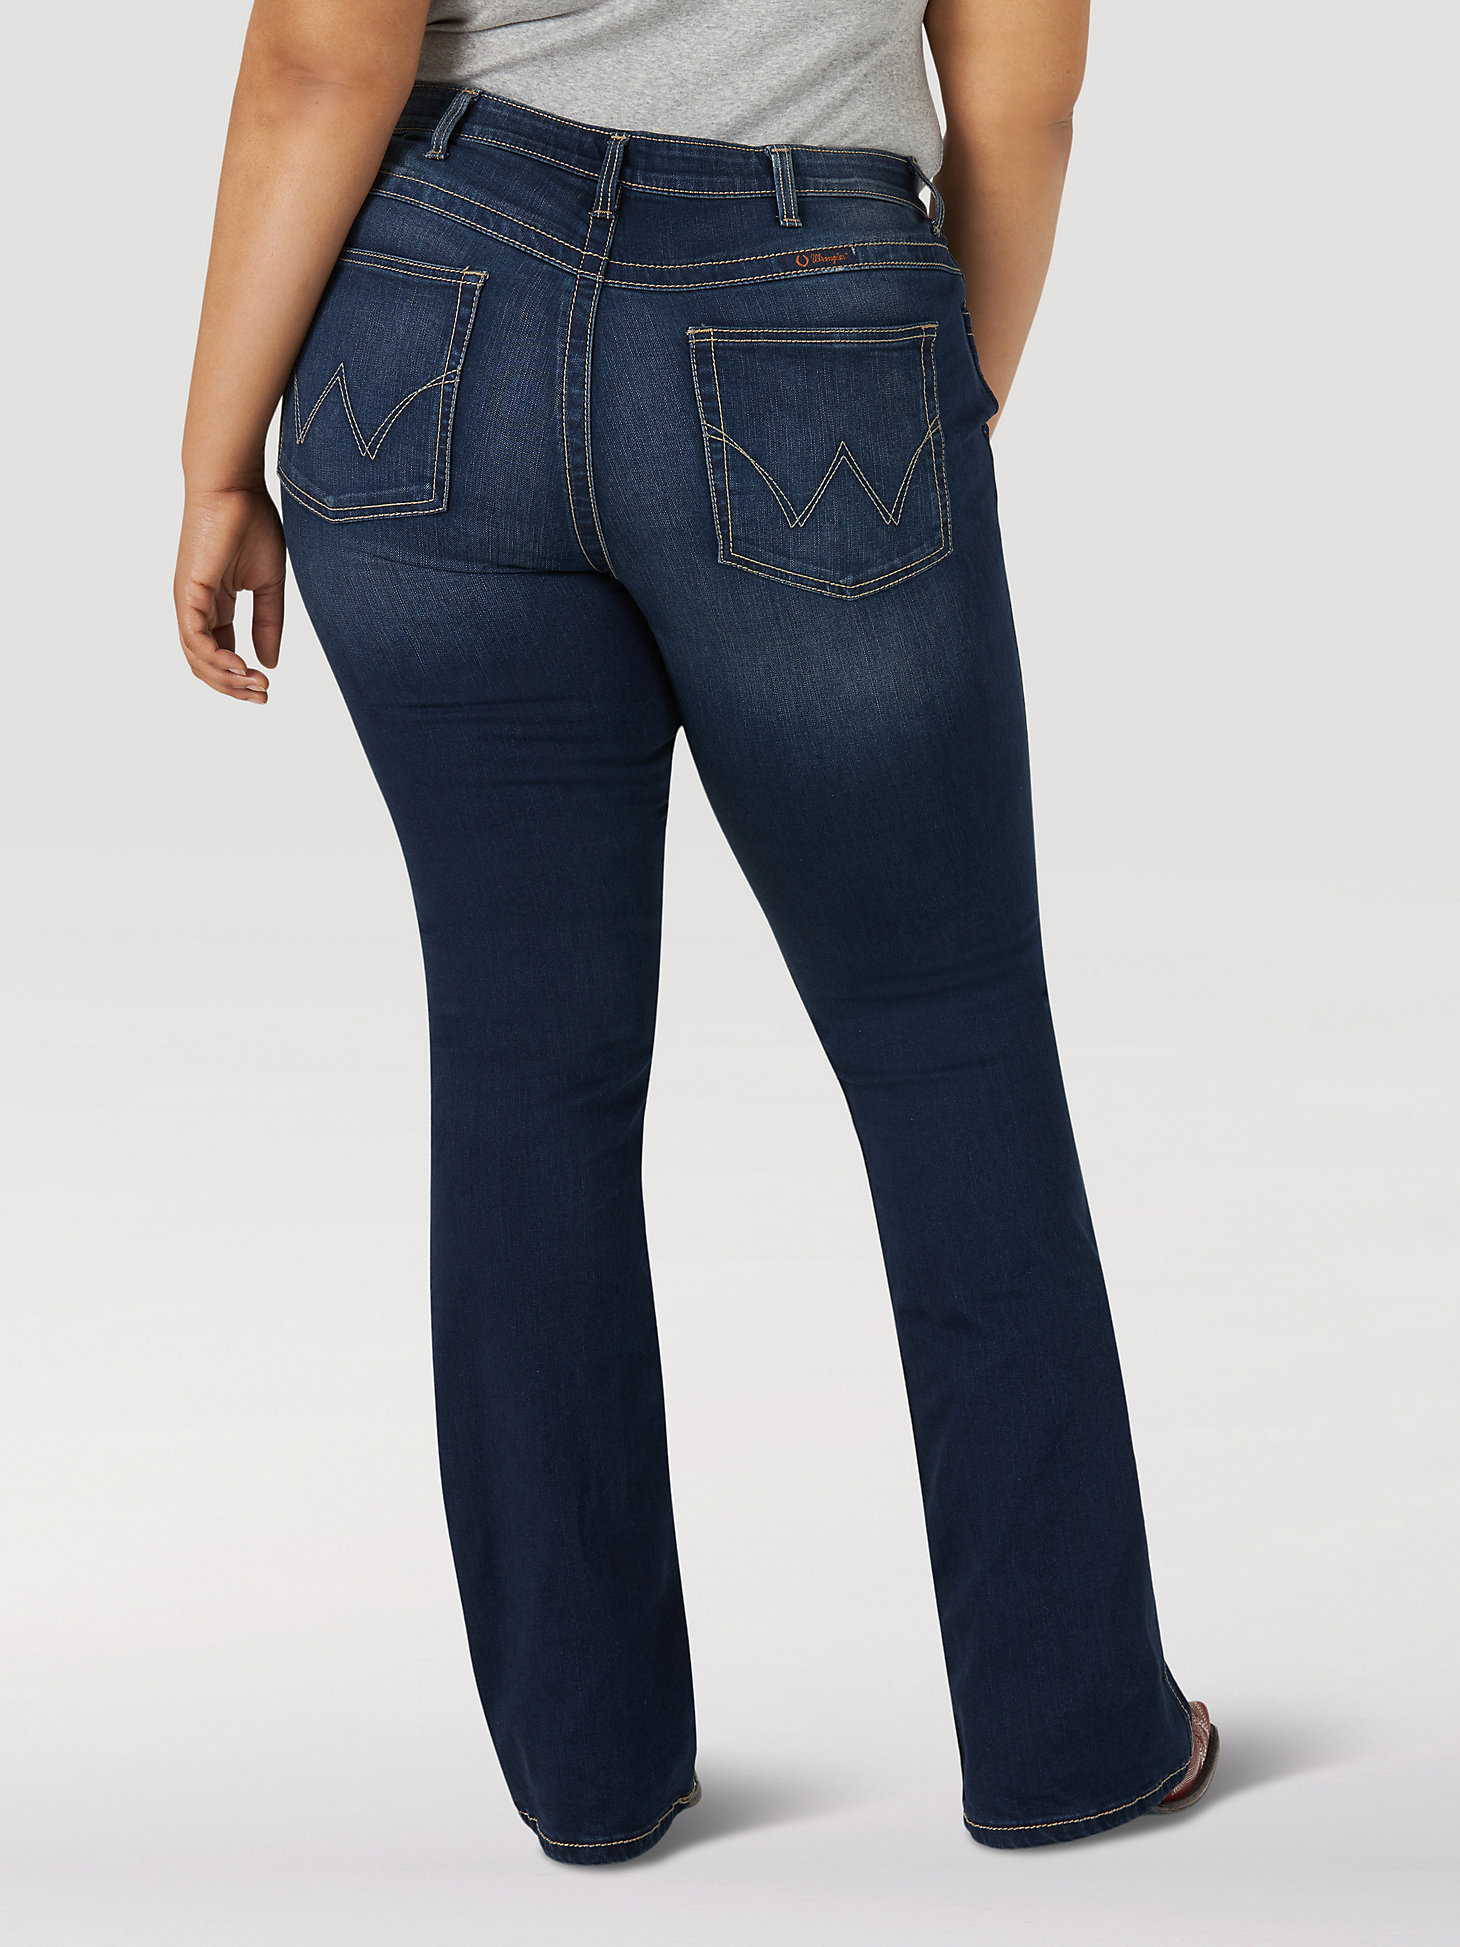 Women's Wrangler® Ultimate Riding Jean Q-Baby (Plus) in NR Wash alternative view 2